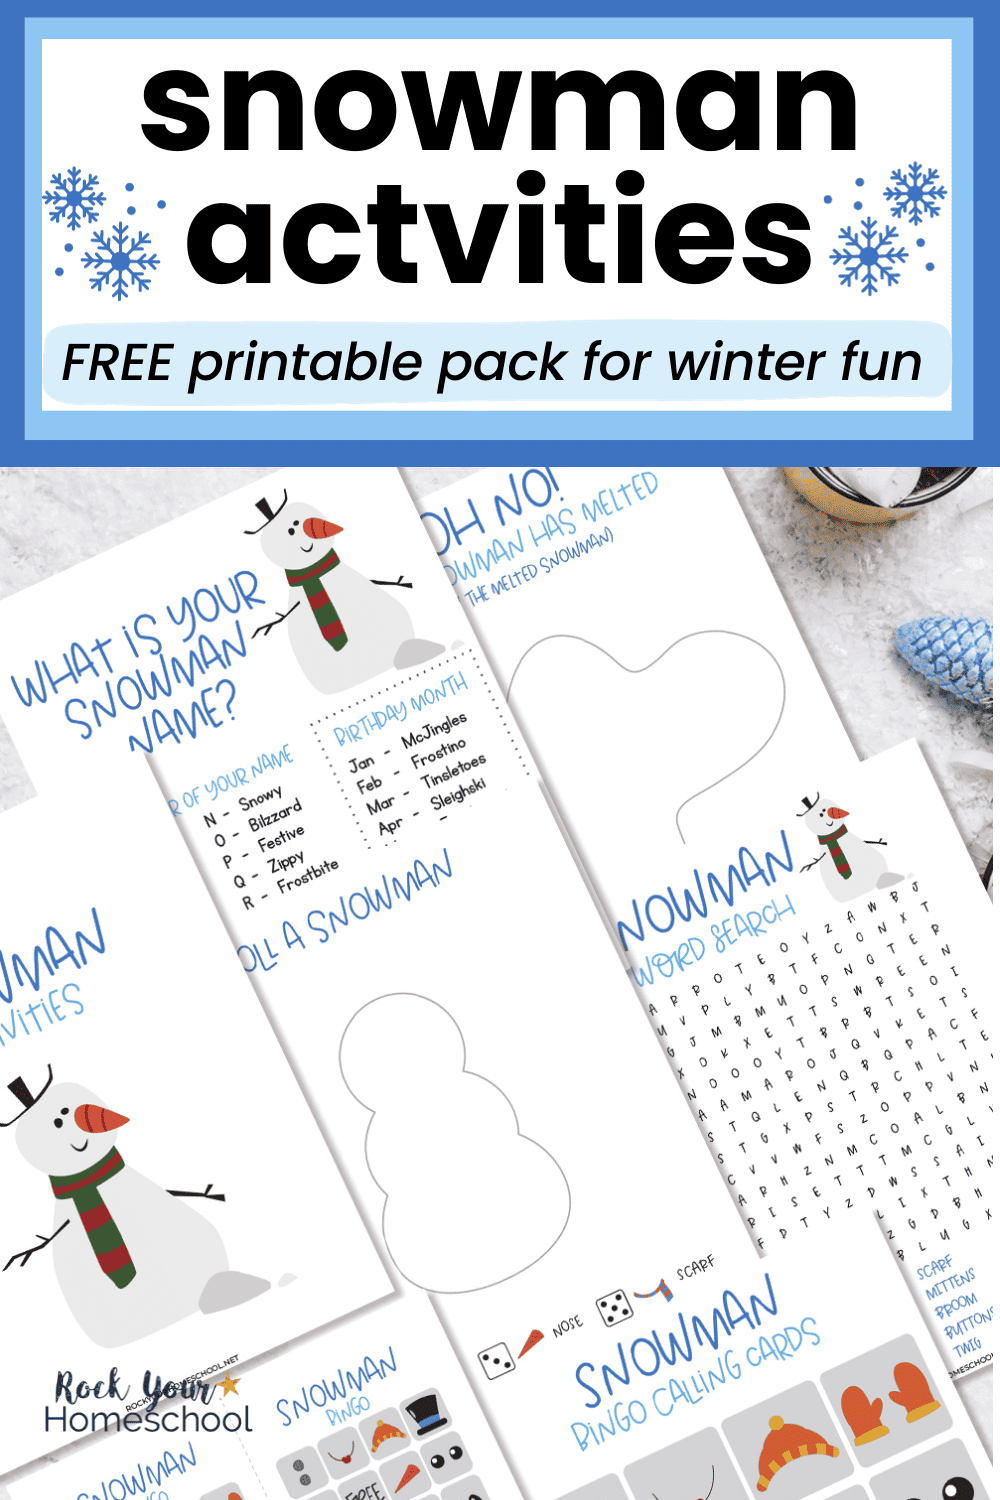 Snowman Activities for Kids: 5 Easy Ways to Have Fun (Free)